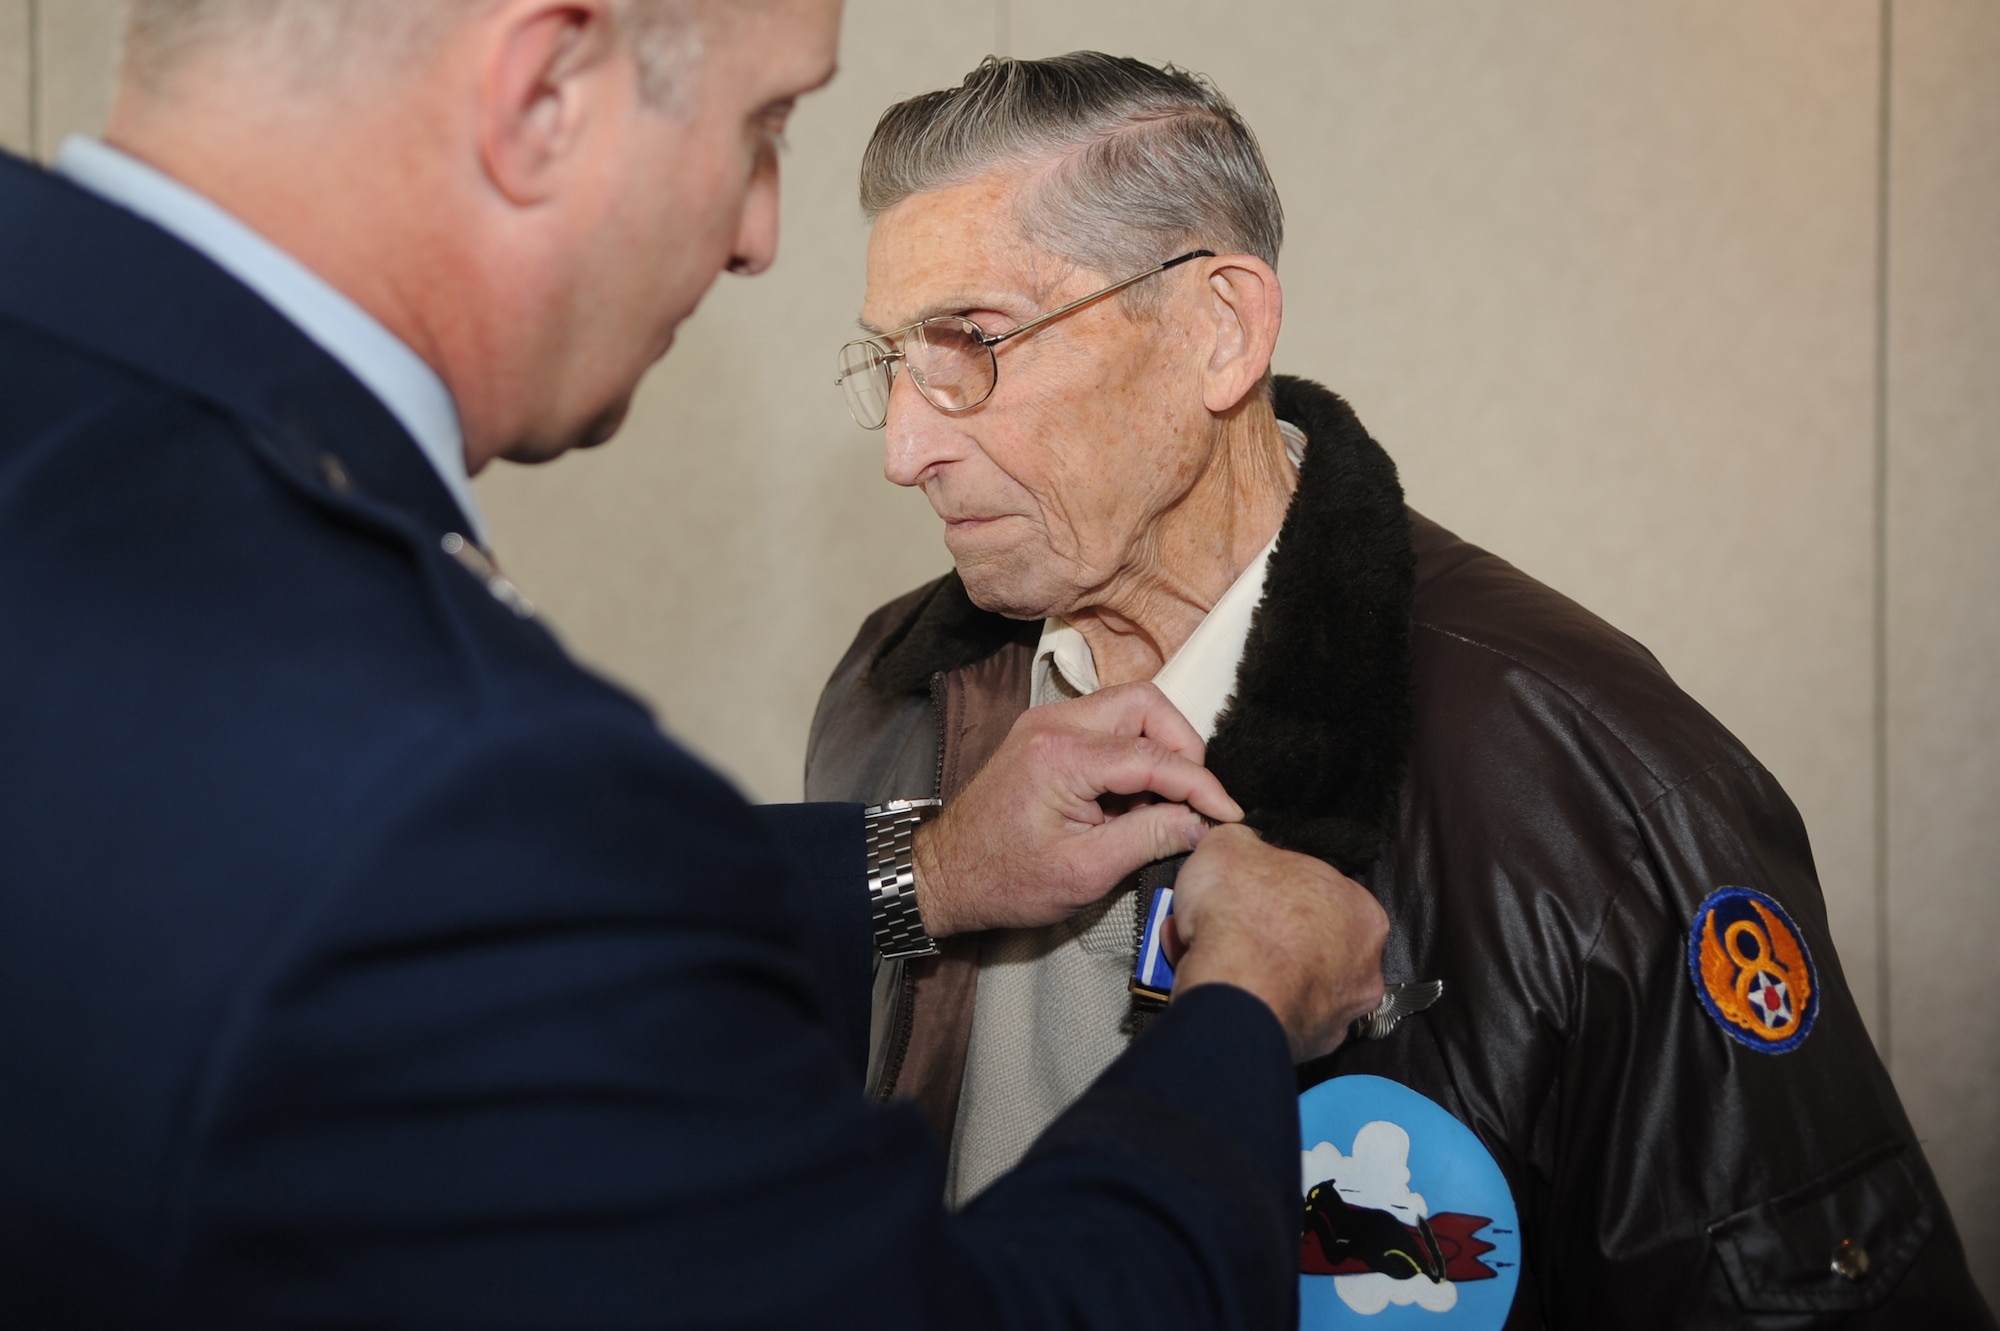 WHITEMAN AIR FORCE BASE, Mo. - Brig. Gen. Garrett Harencak, 509th Bomb Wing commander, pins the Distinguished Flying Cross on Edward Ireland's Flight Jacket Dec. 6 during a ceremony at the Royal Oaks Golf Course here. Mr. Ireland earned the medal more than 60 years ago for his actions as a top turret gunner on B-17 Flying Fortress bombers during World War II. Due to missions during the war, Mr. Ireland was never formally presented his medal. (U.S. Air Force photo/Senior Airman Jessica Snow)